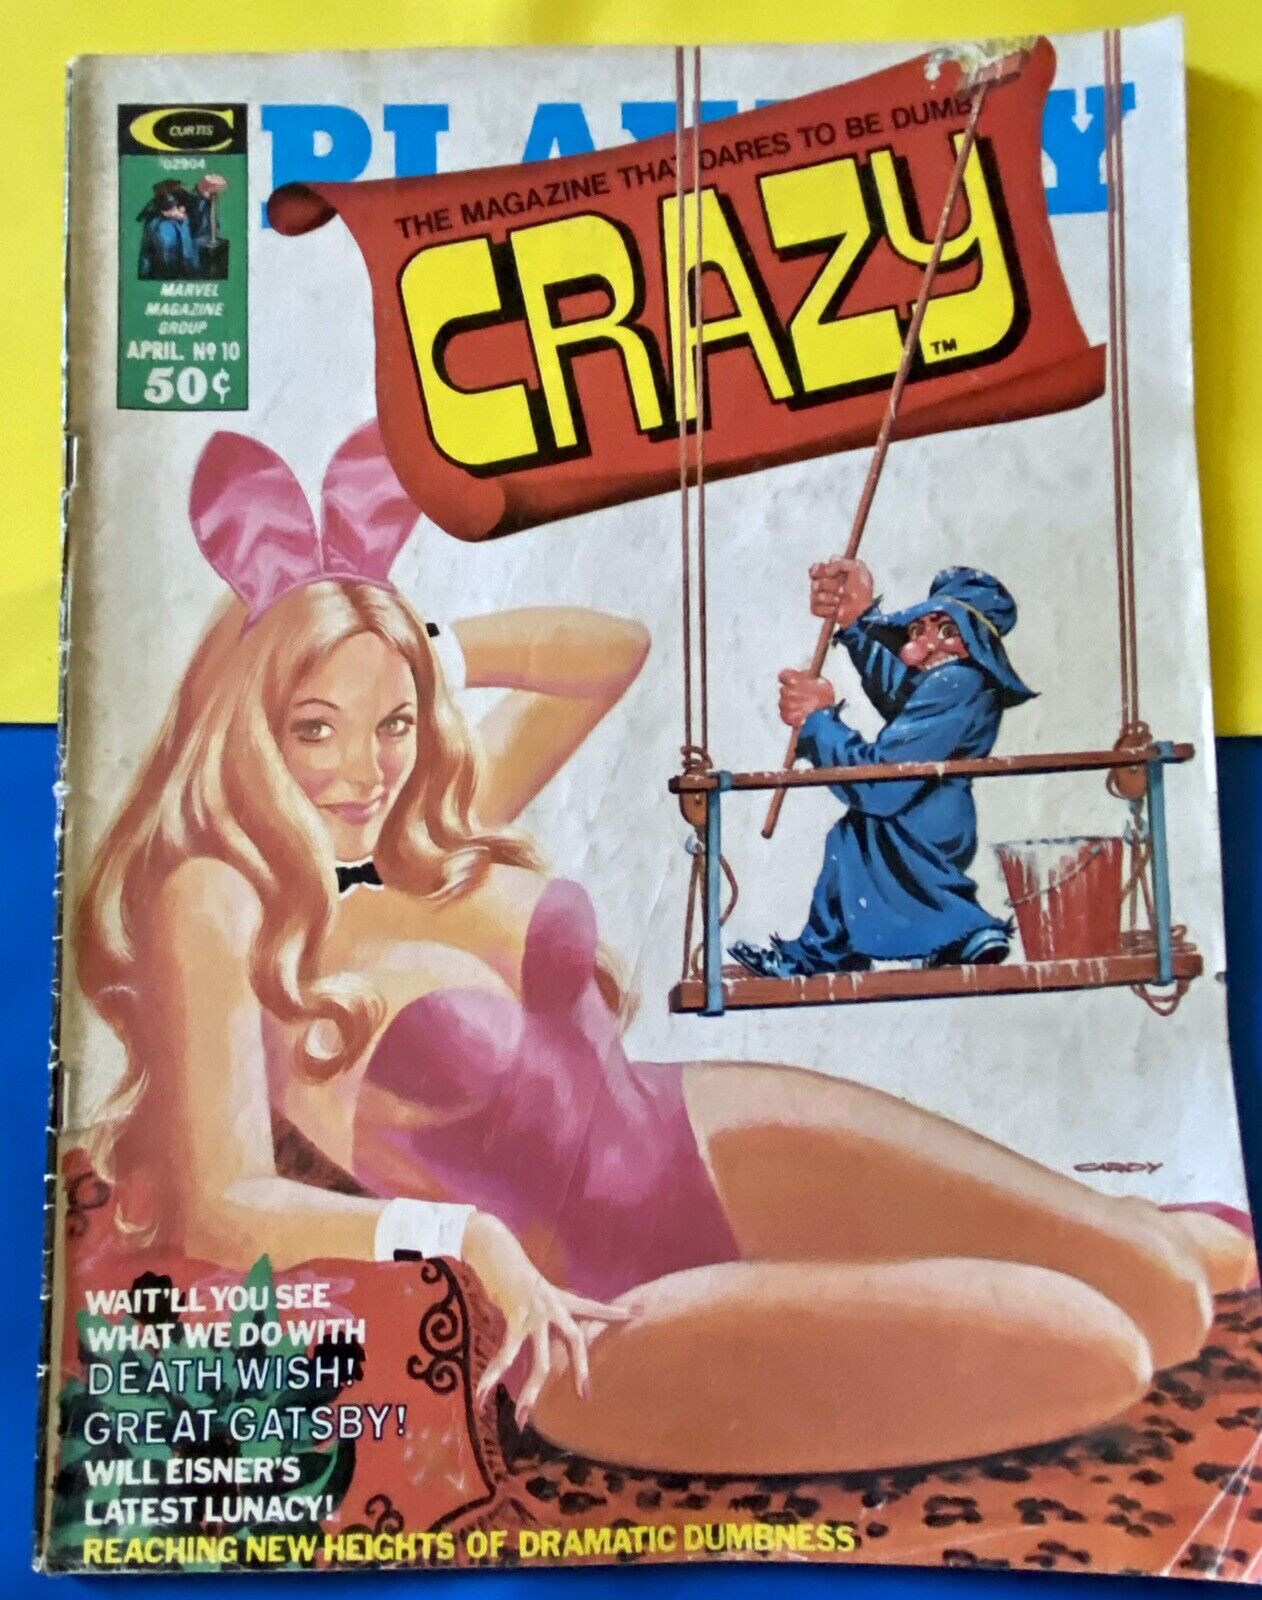 Vintage CRAZY Magazine Playboy Bunny Cover #10 April 1975 Issue